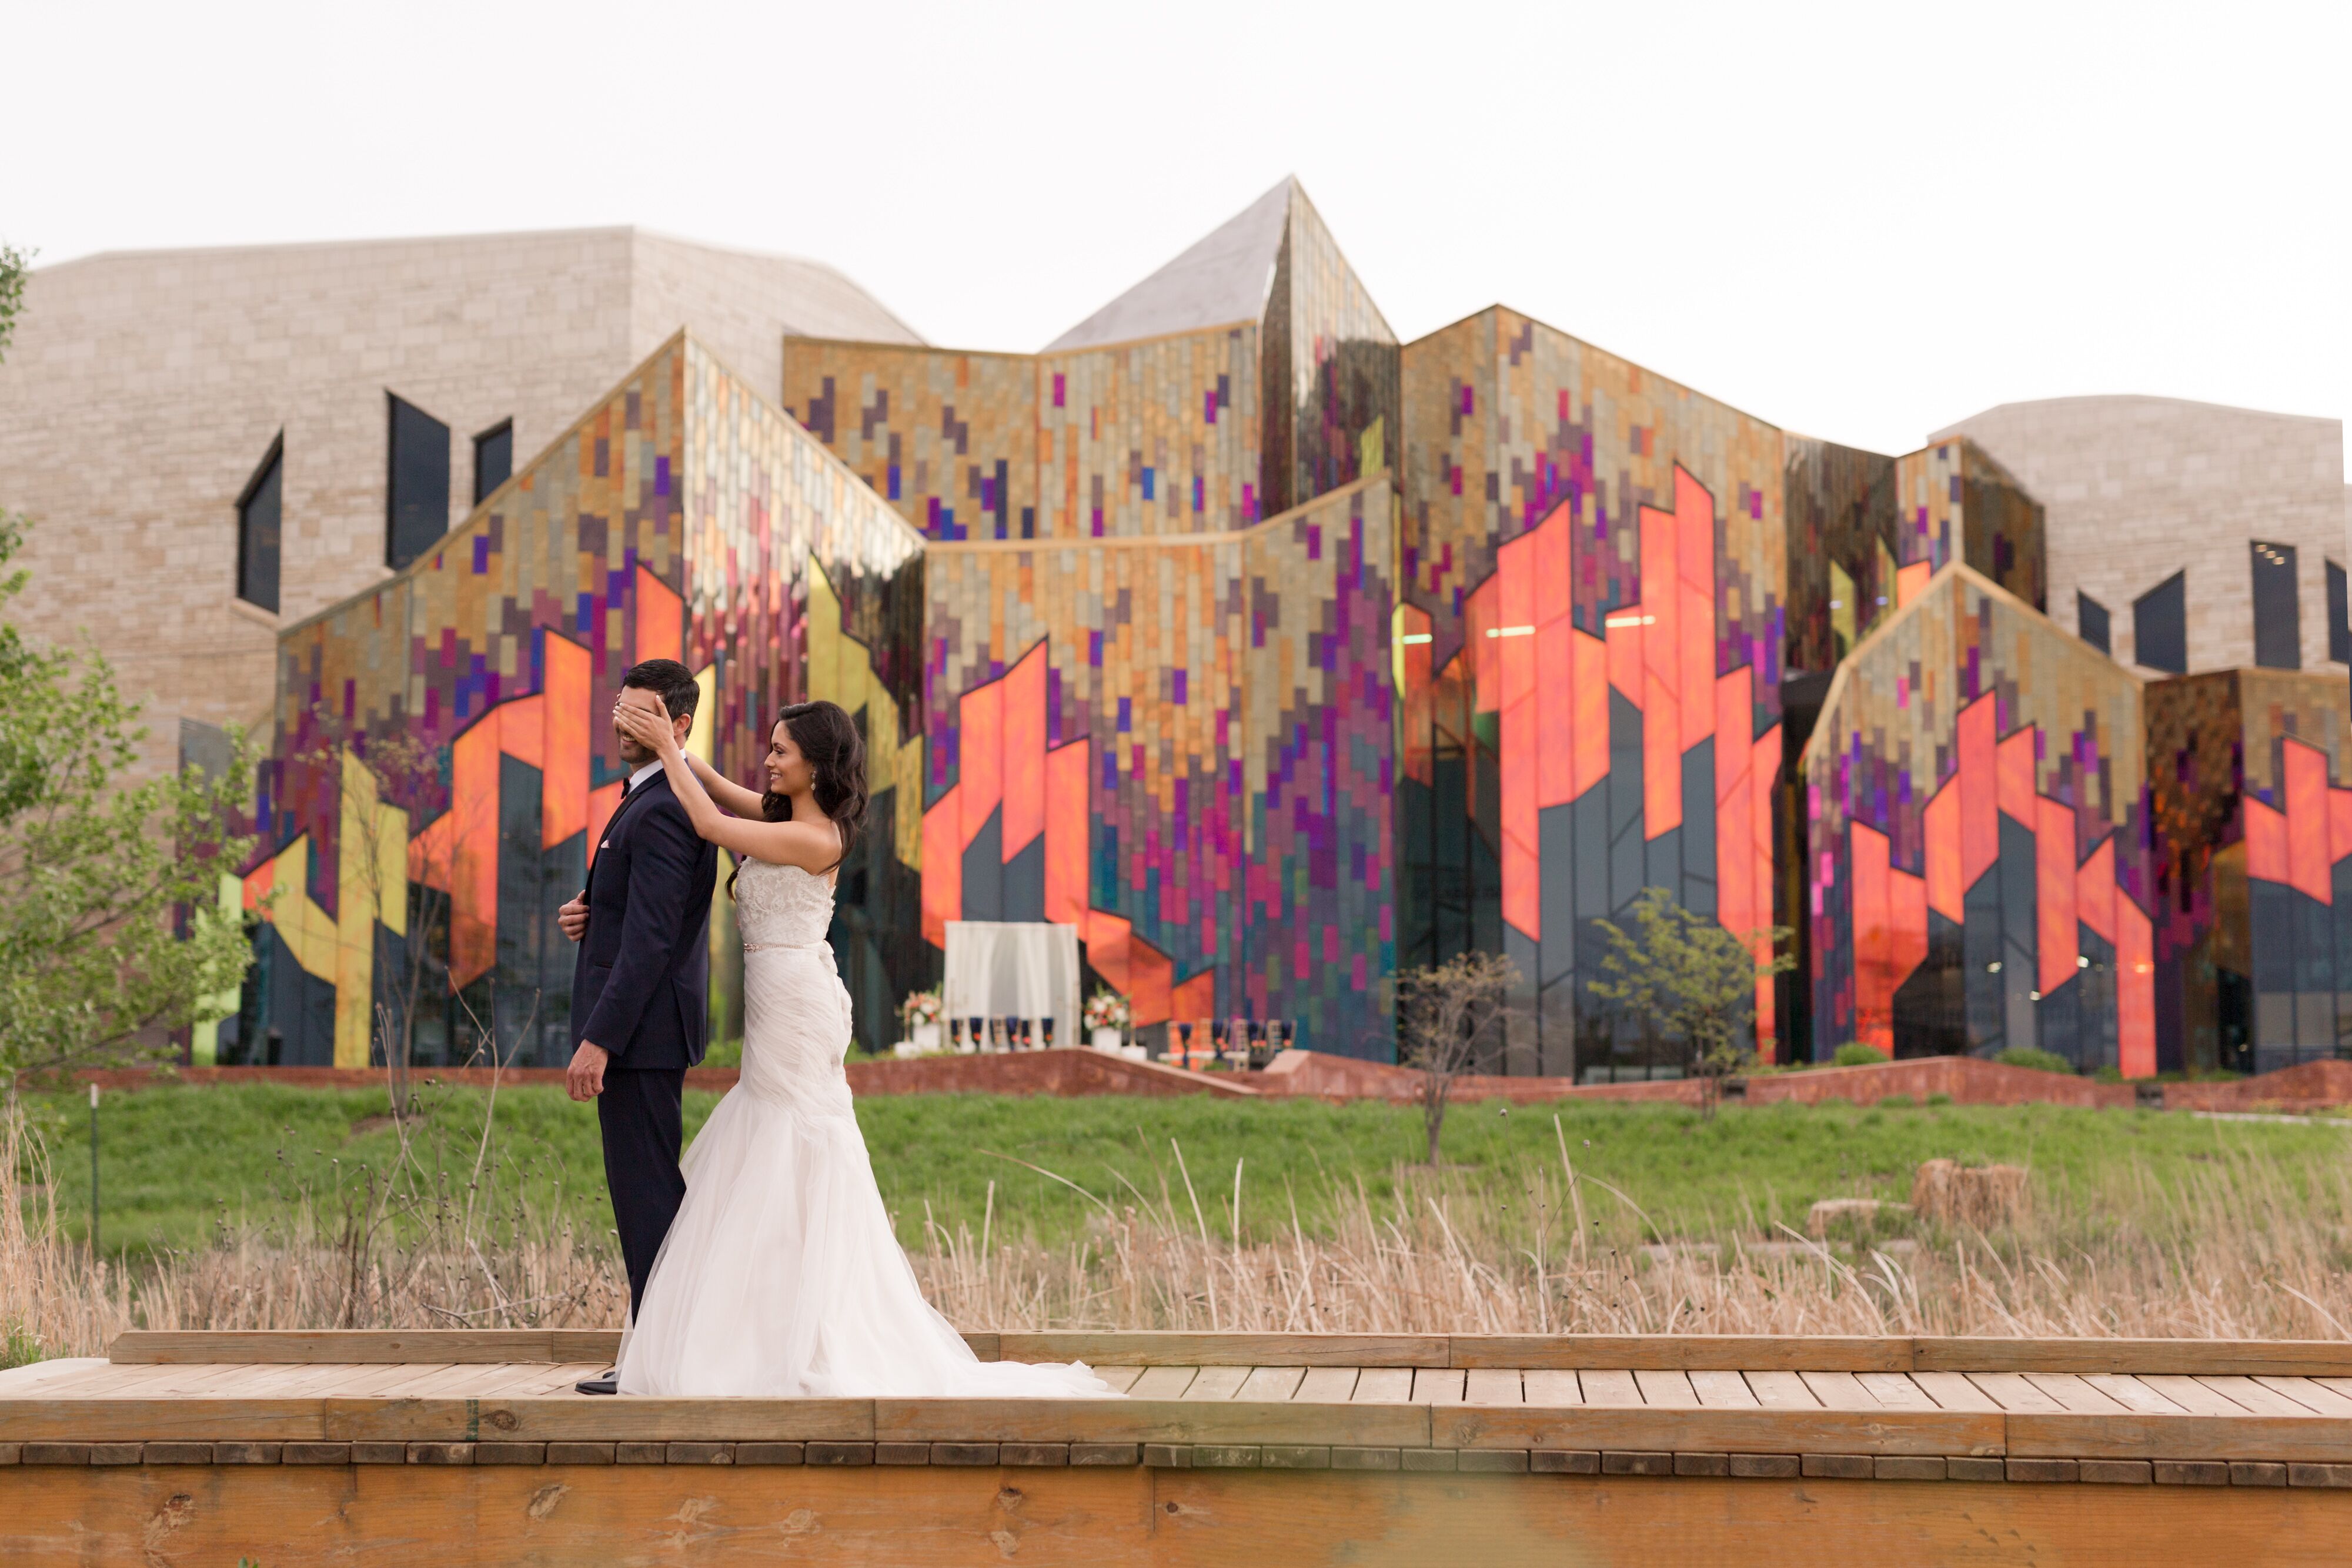 Museum at Prairiefire | Reception Venues - The Knot